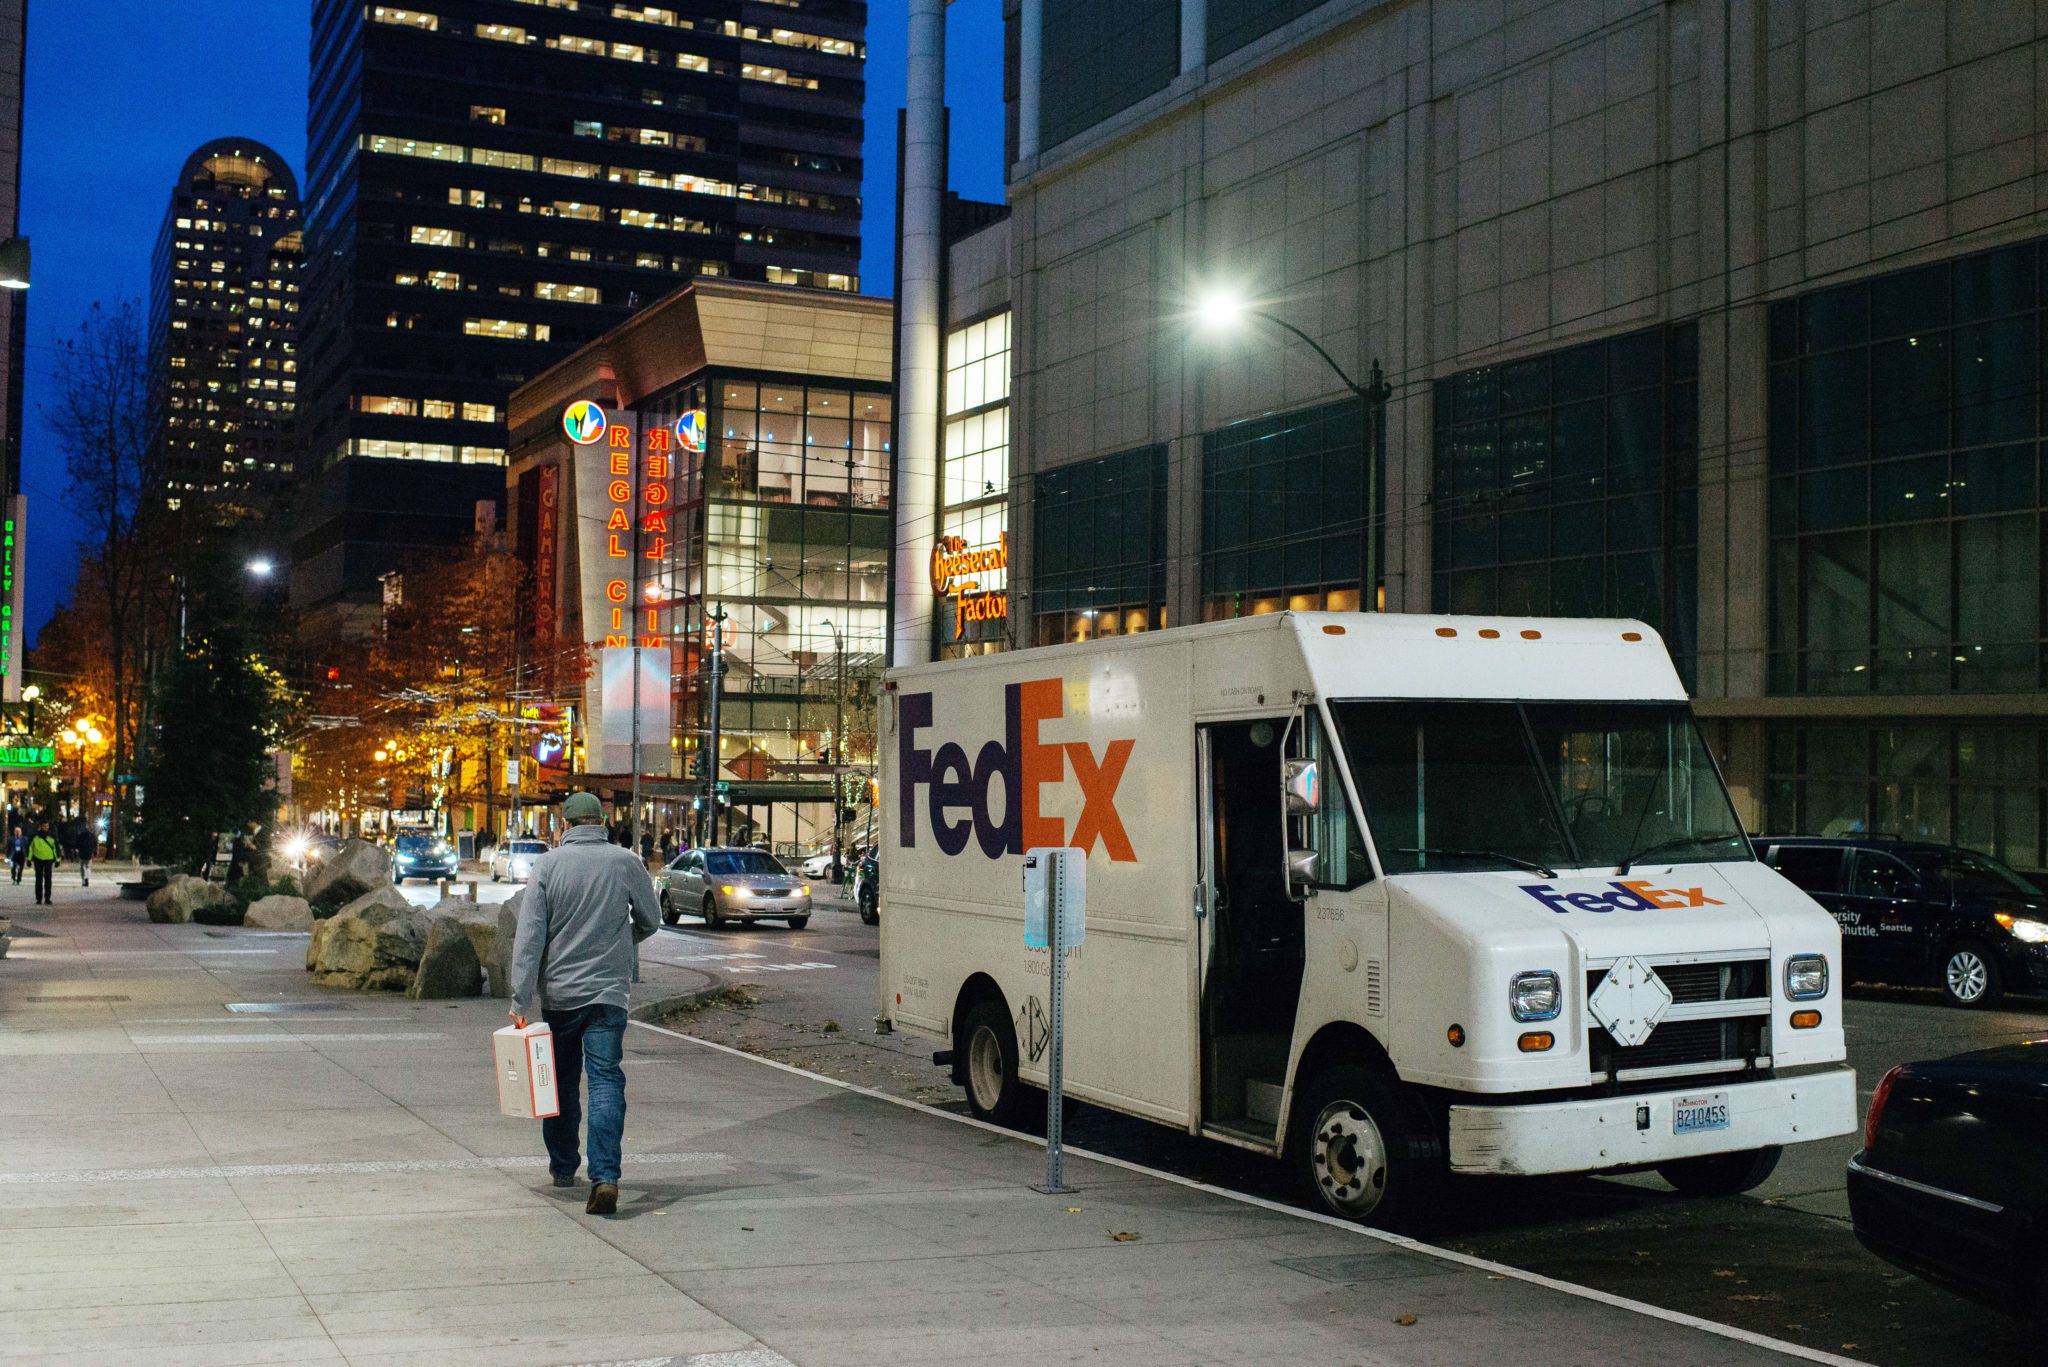 A white FedEx delivery truck is parked in a load/unload zone in downtown Seattle. Large buildings are visible in the background in the evening, and a man walks down the street carrying a bag.